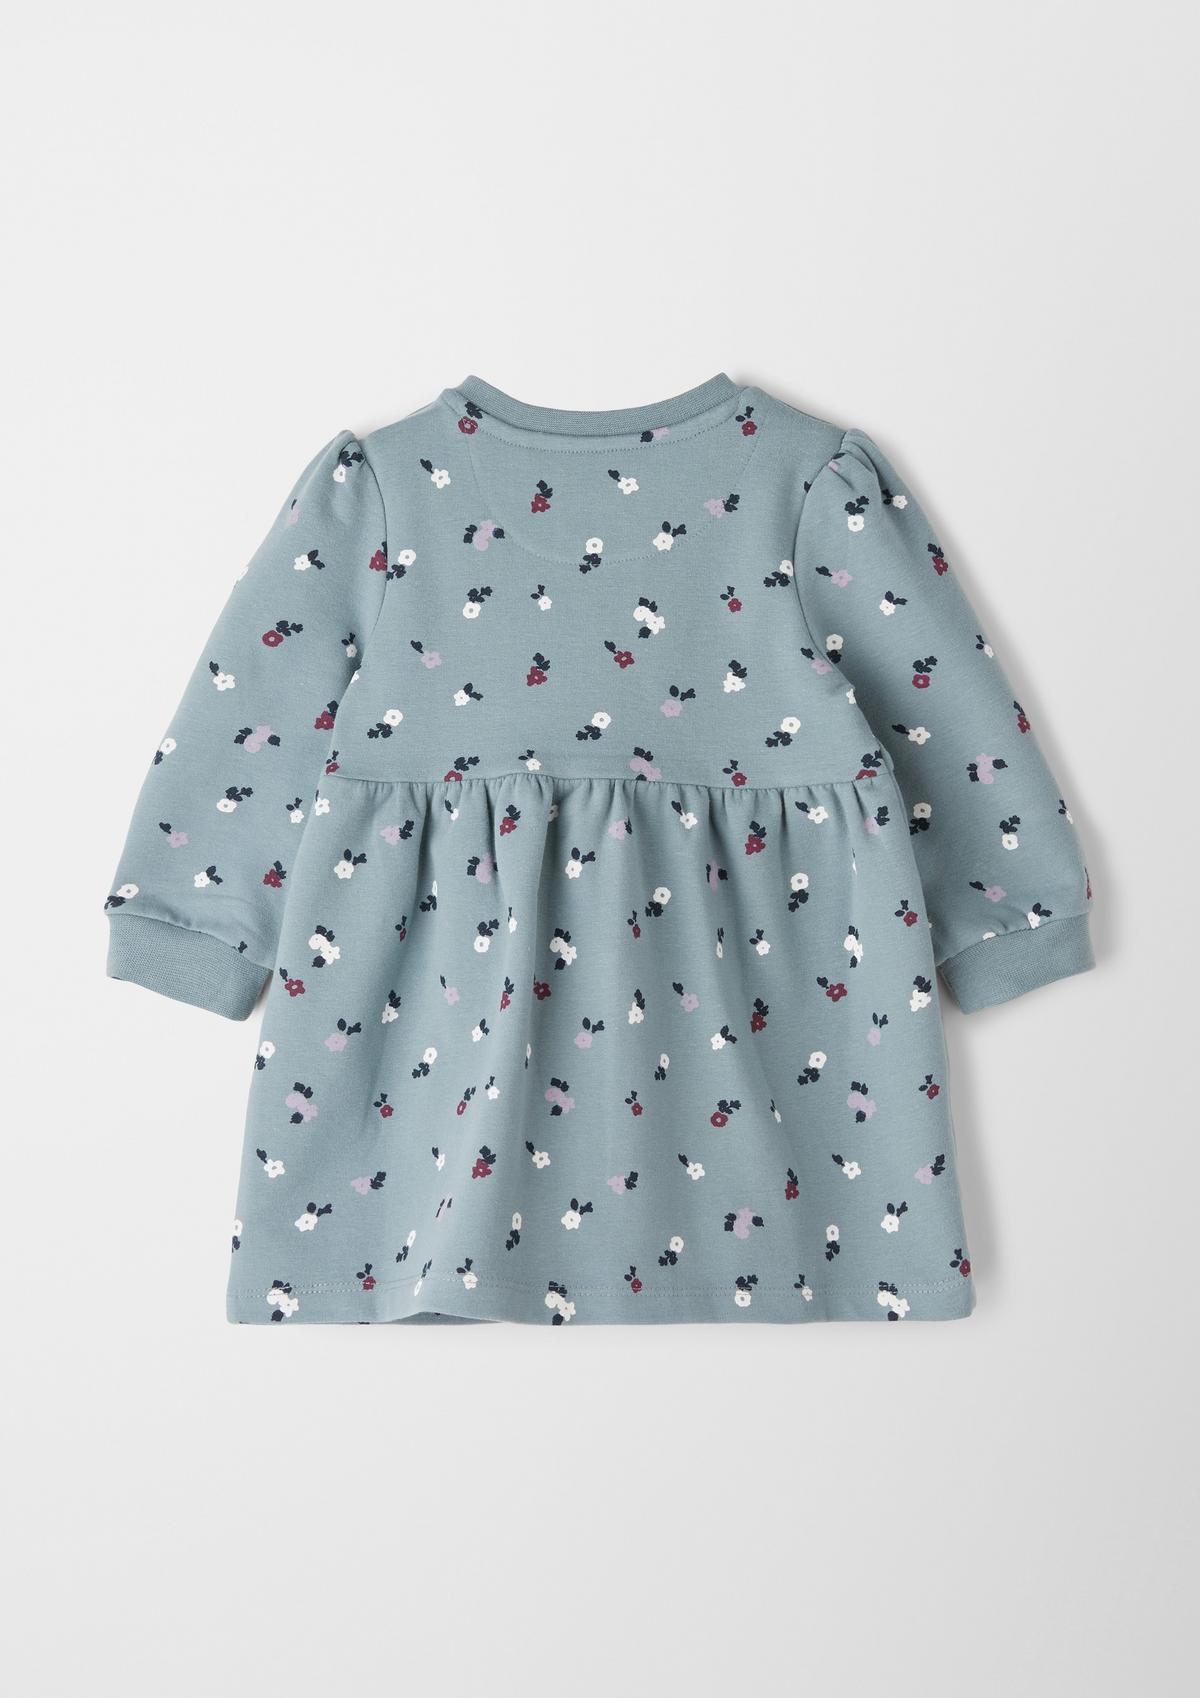 s.Oliver Sweatshirt dress with a floral pattern